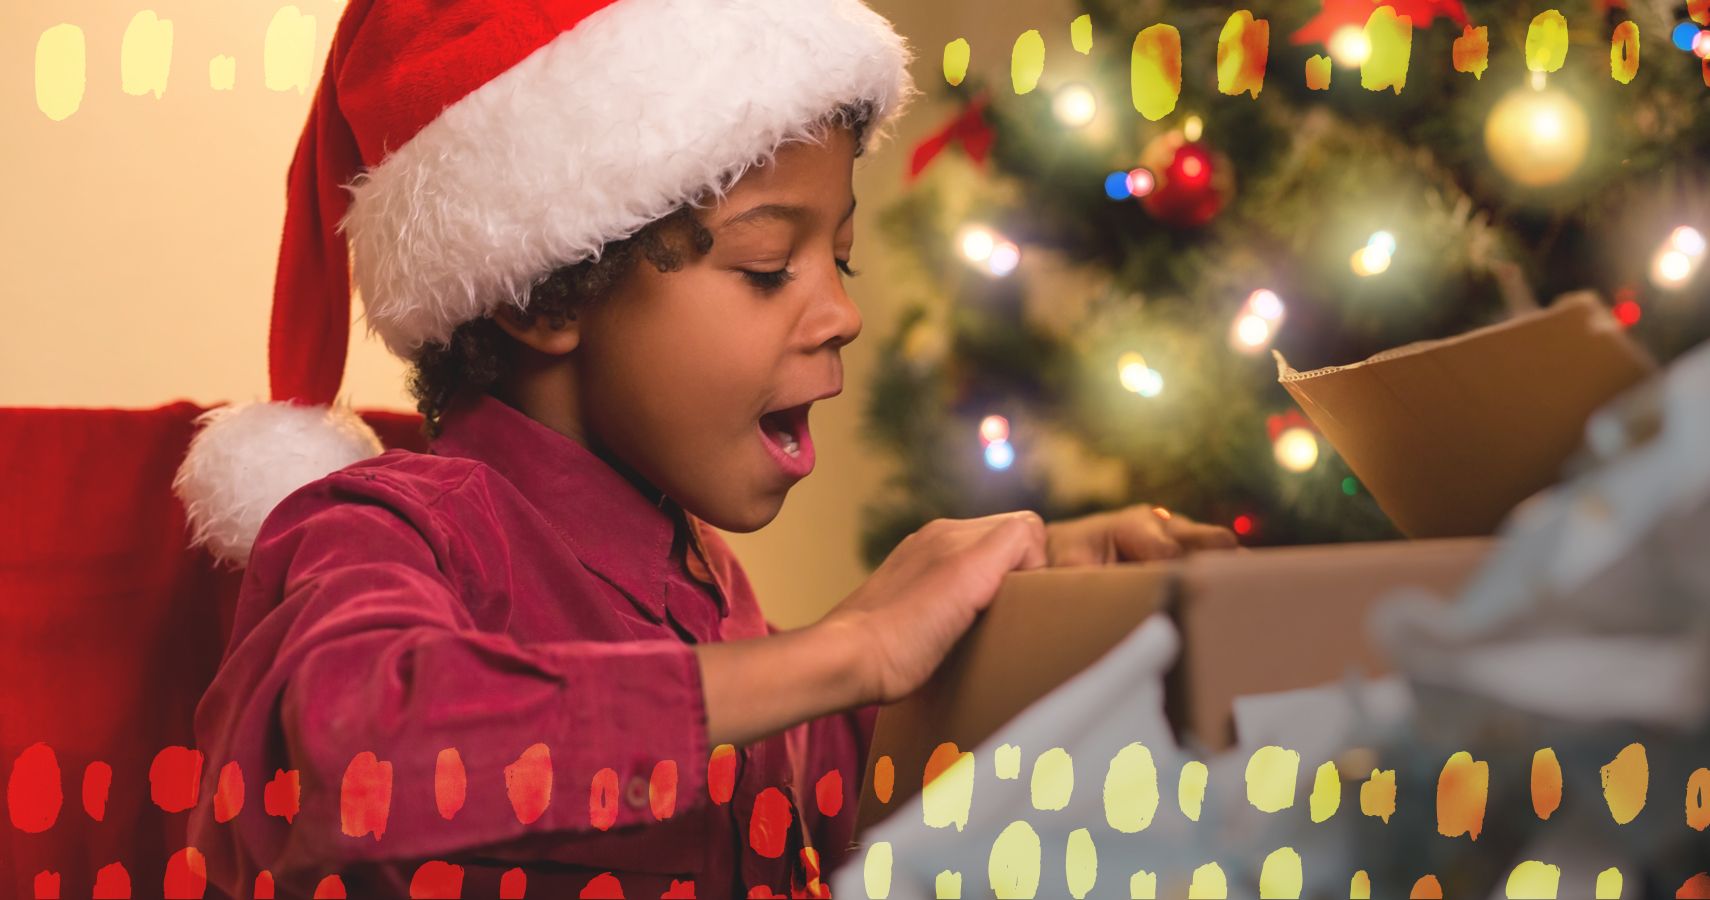 How To Explain To Your Child That Santa Might Not Give As Many Gifts This Year